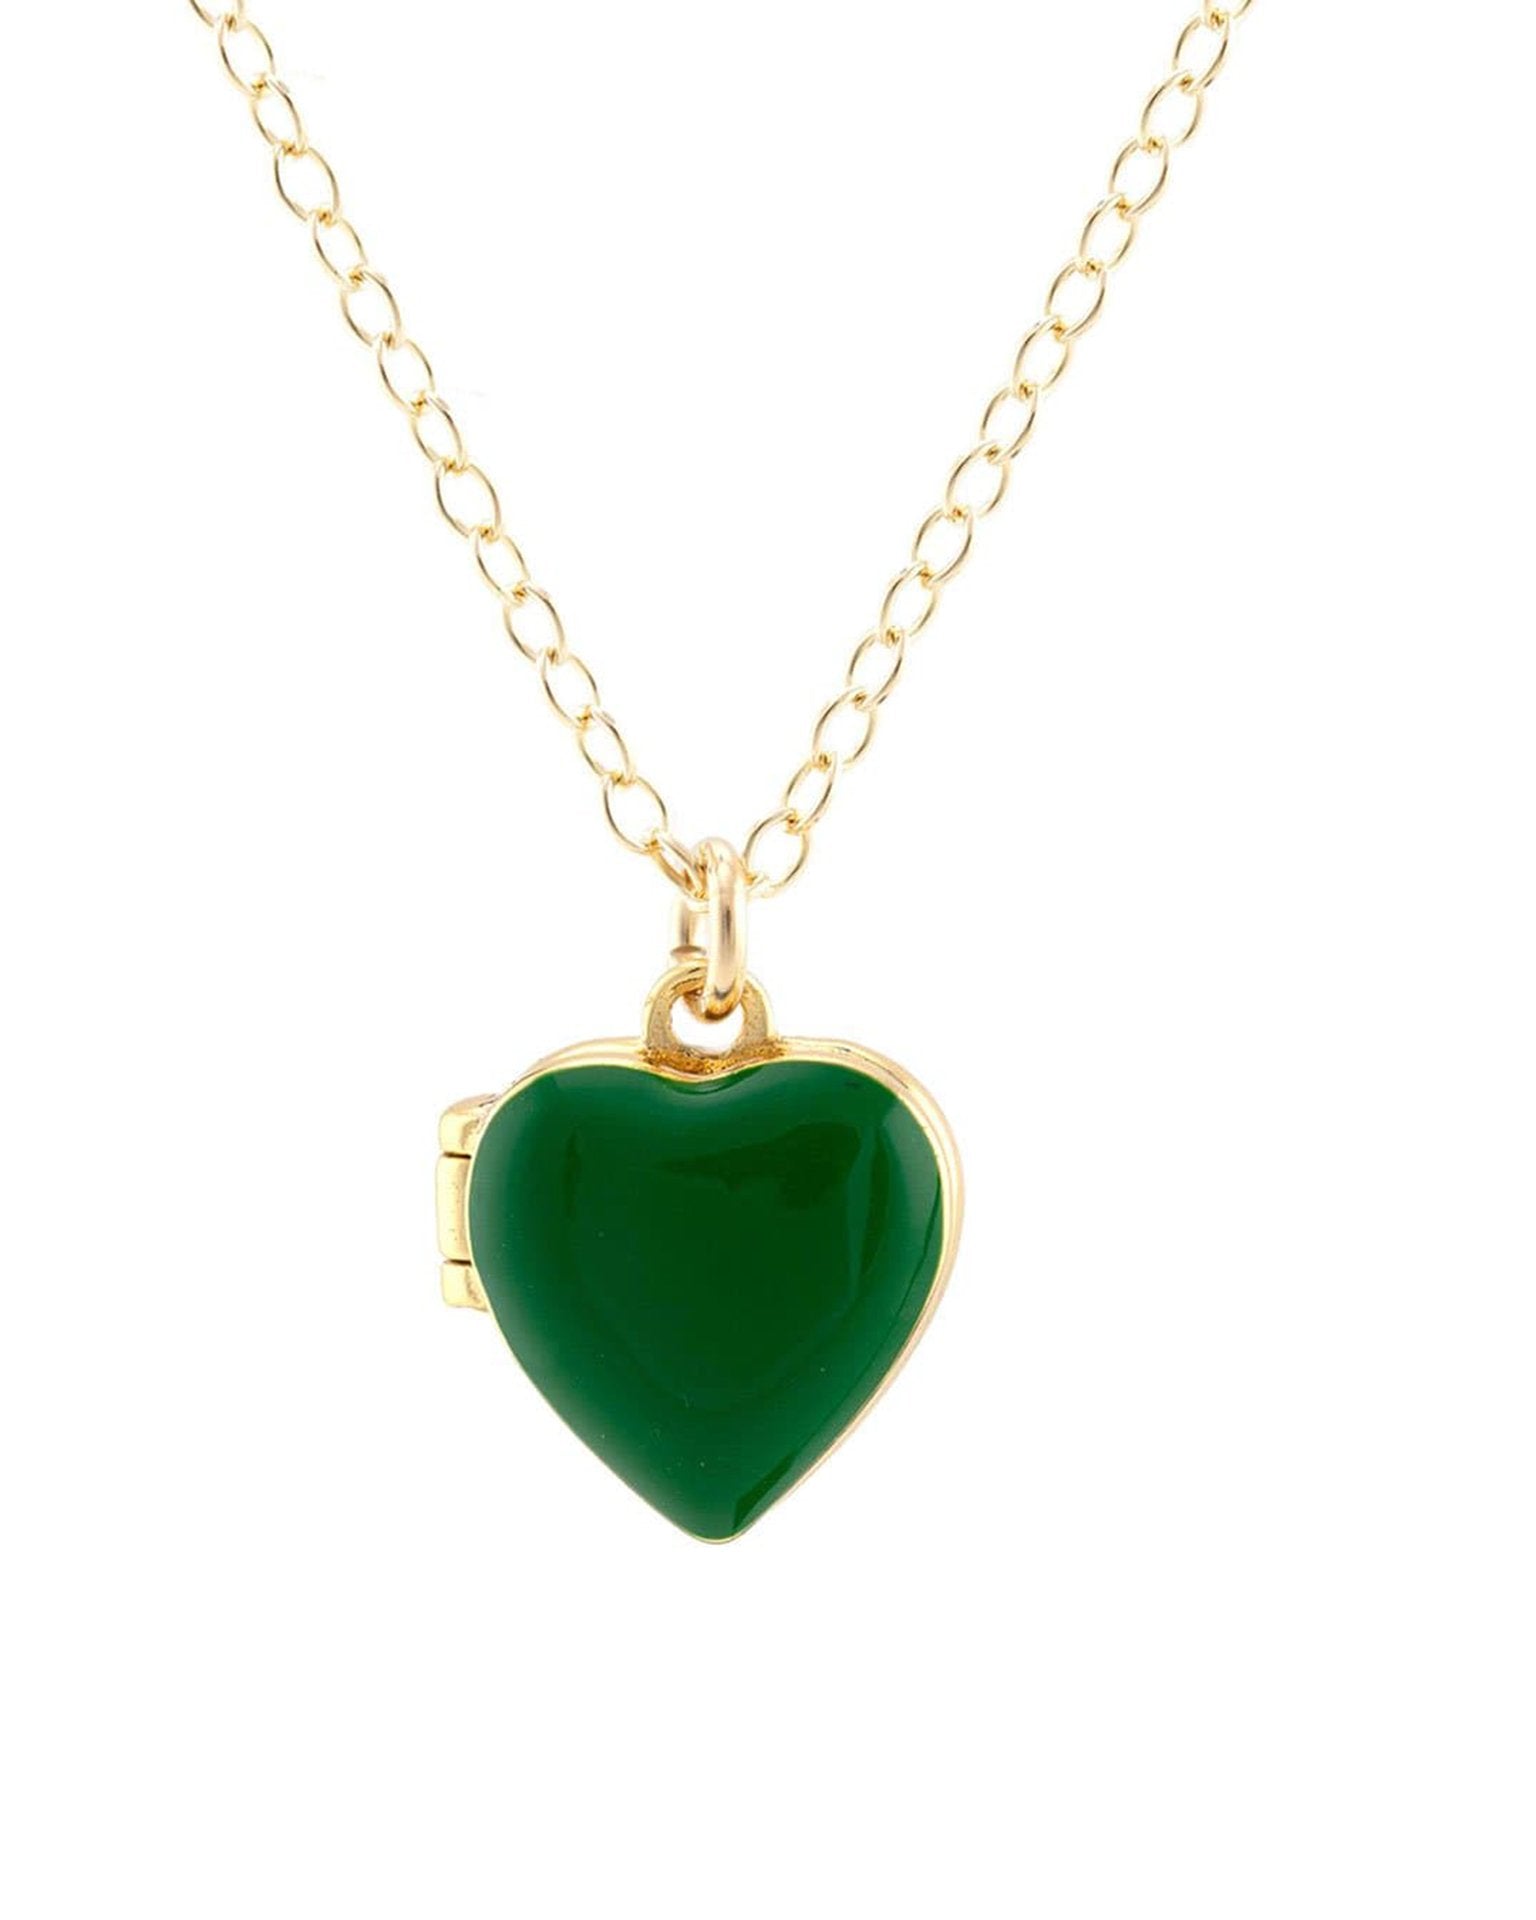 Glow in the Dark Green Heart Shaped Pendant, Green Glowing Pendant With  Gold Metallic Flakes, Handmade Jewellery, Leather Cord Necklace - Etsy UK |  Heart shape pendant, Heart shapes, Leather corded necklace